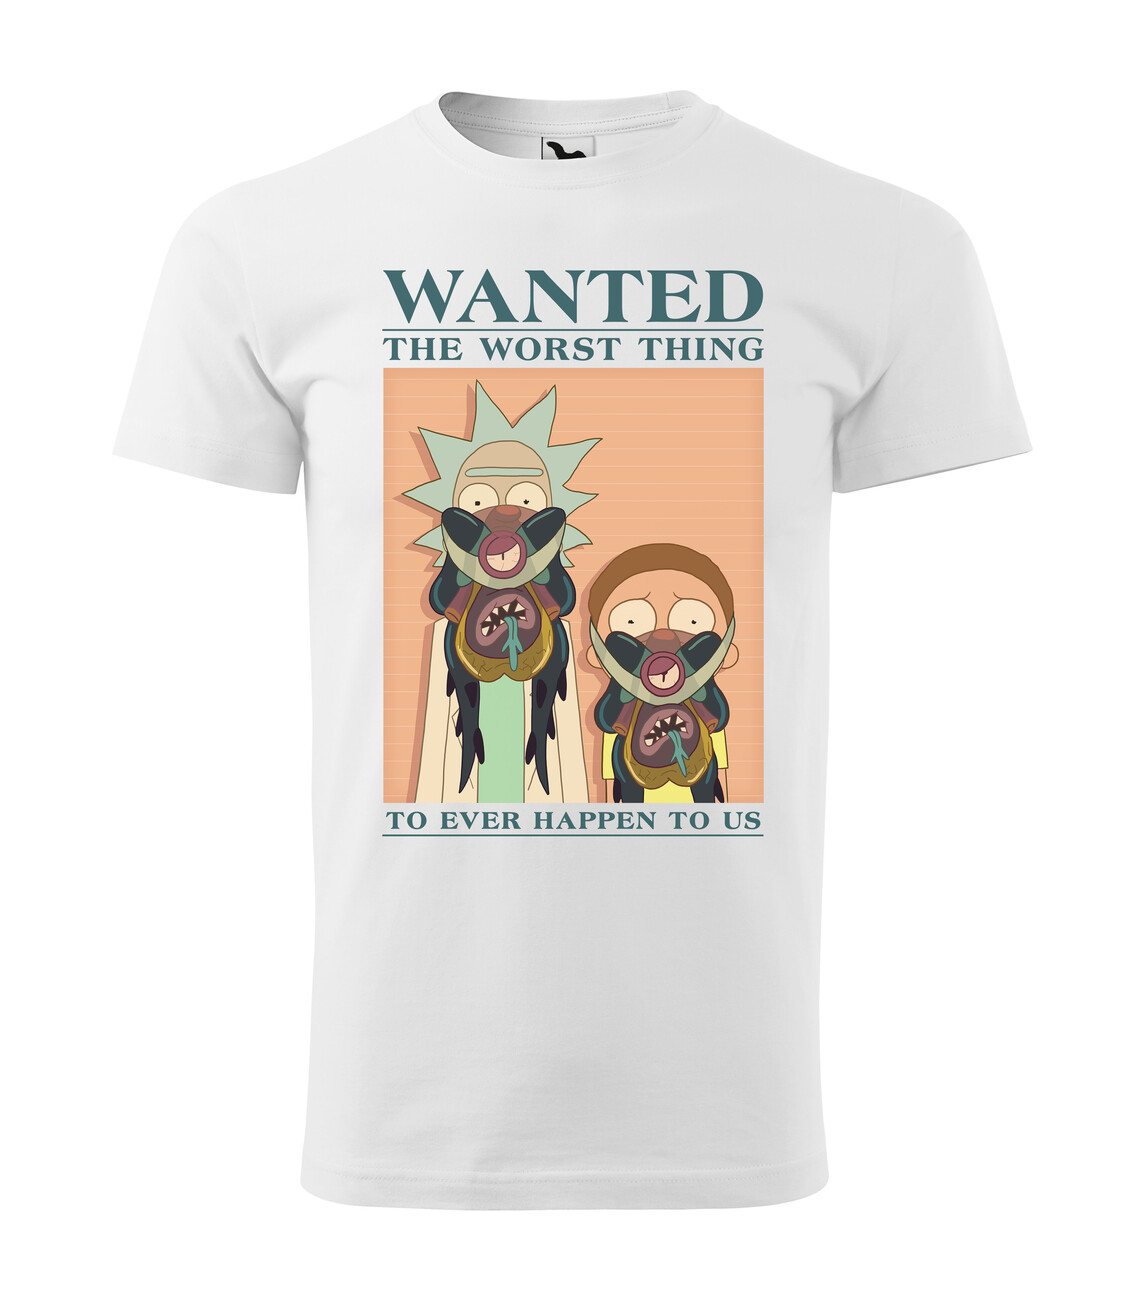 The Best Rick and Morty Merchandise